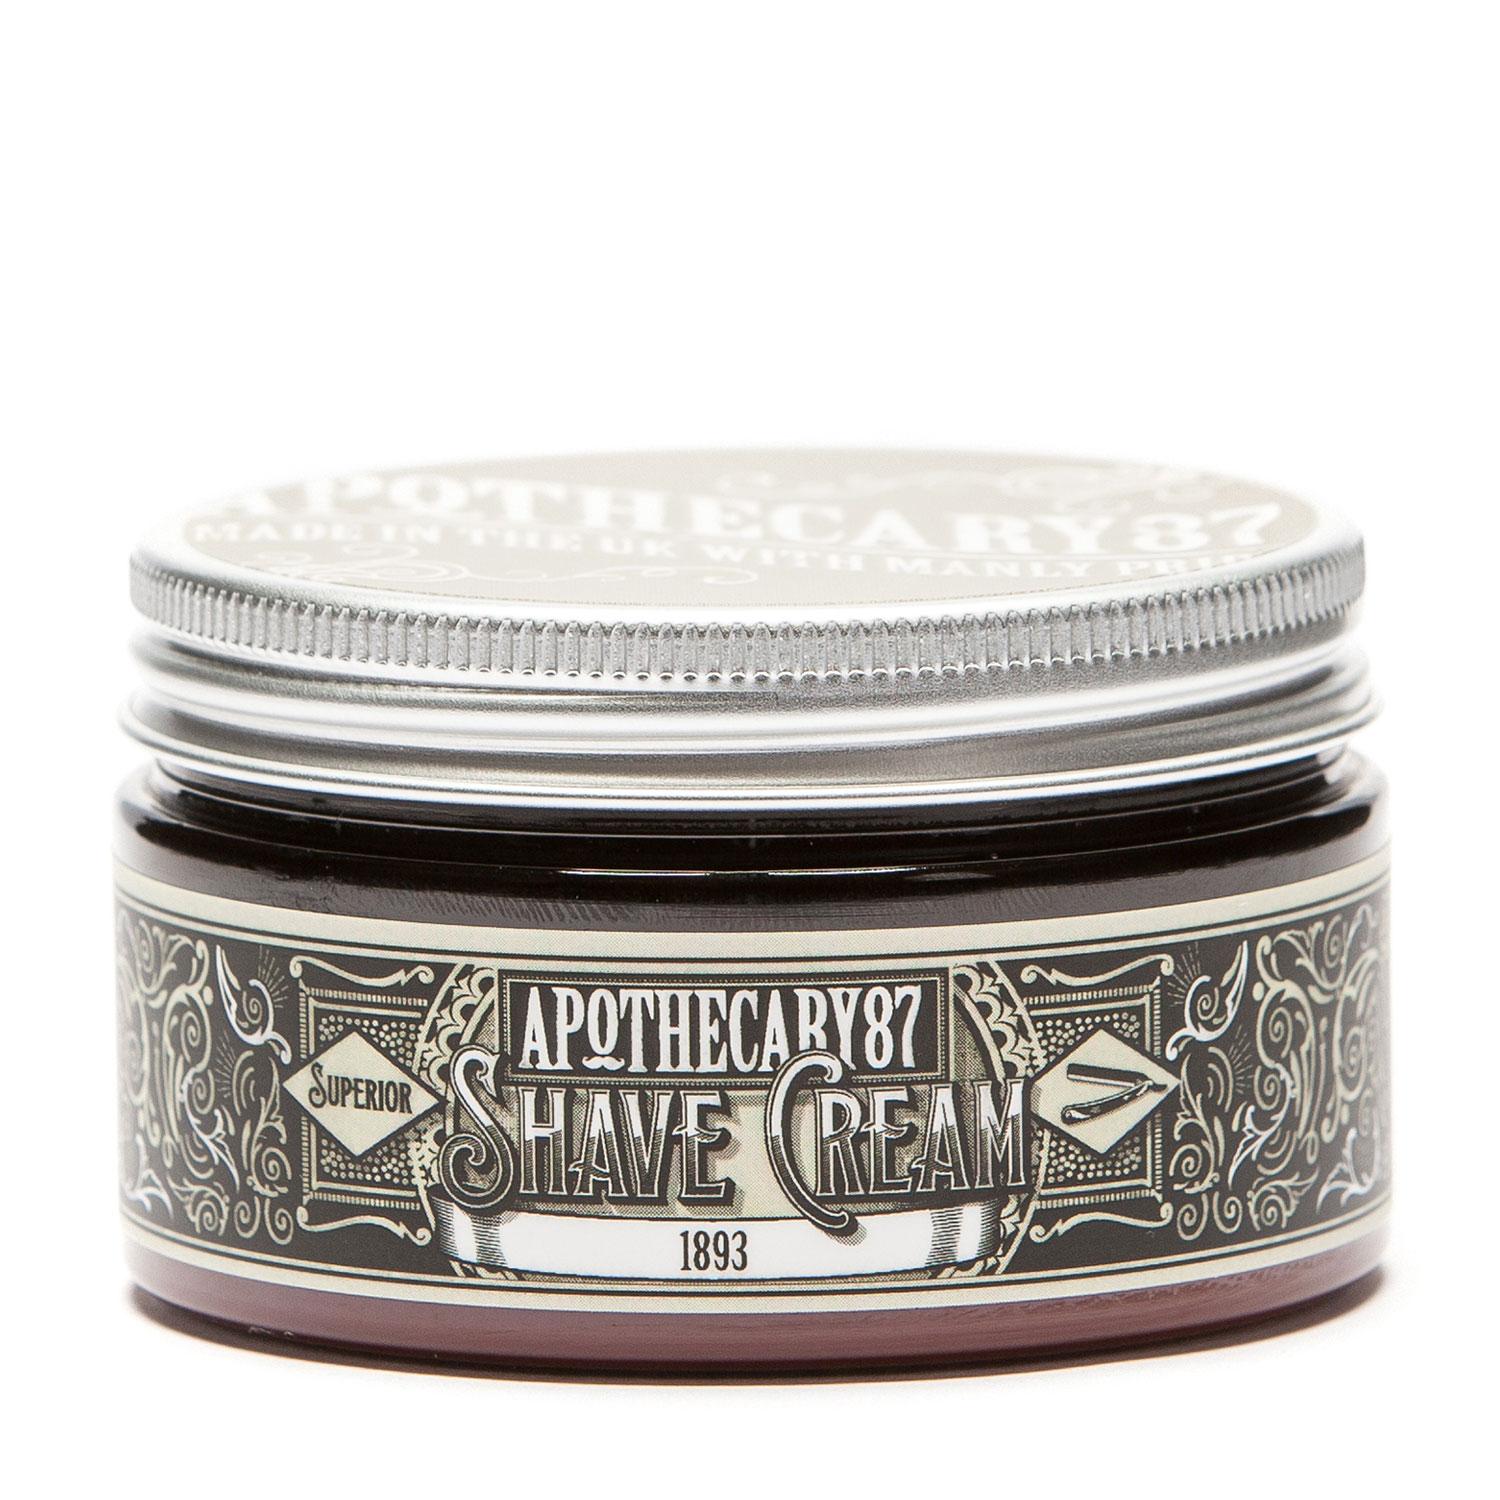 Apothecary87 Grooming - Shave Cream 1893 Fragrance